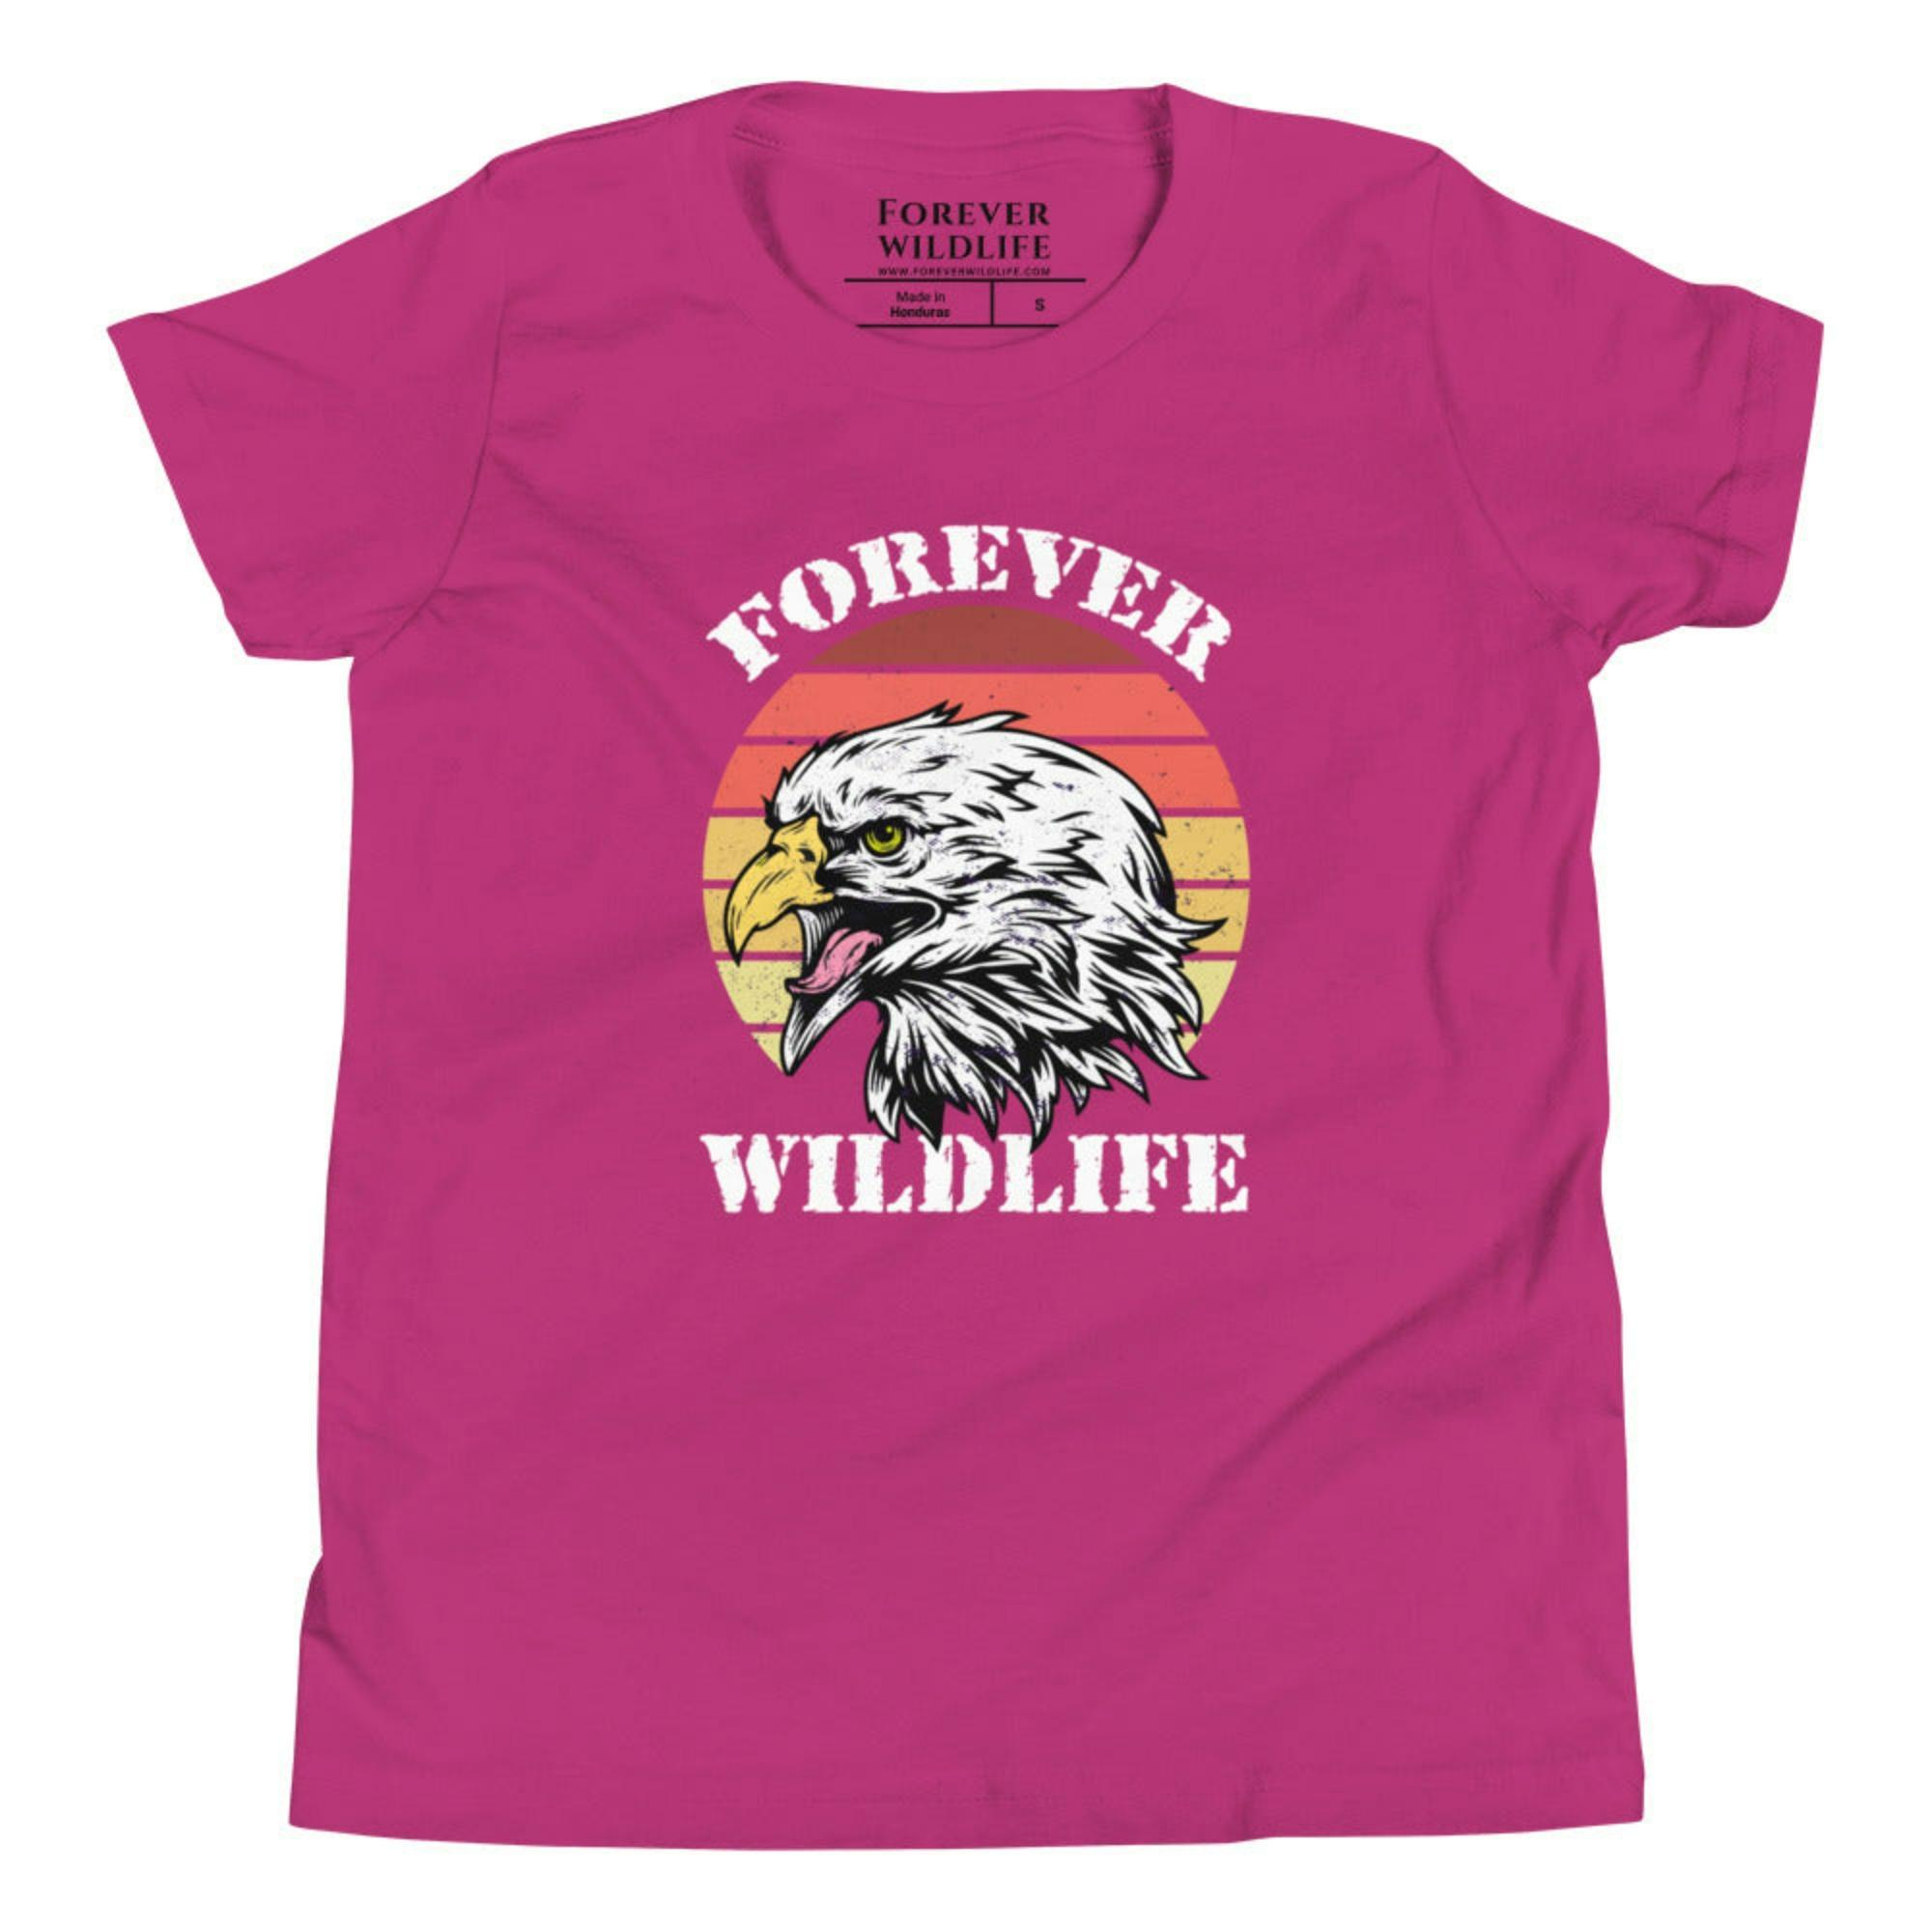 Berry Youth T-Shirt with Eagle graphic as part of Wildlife T Shirts, Wildlife Clothing & Apparel by Forever Wildlife